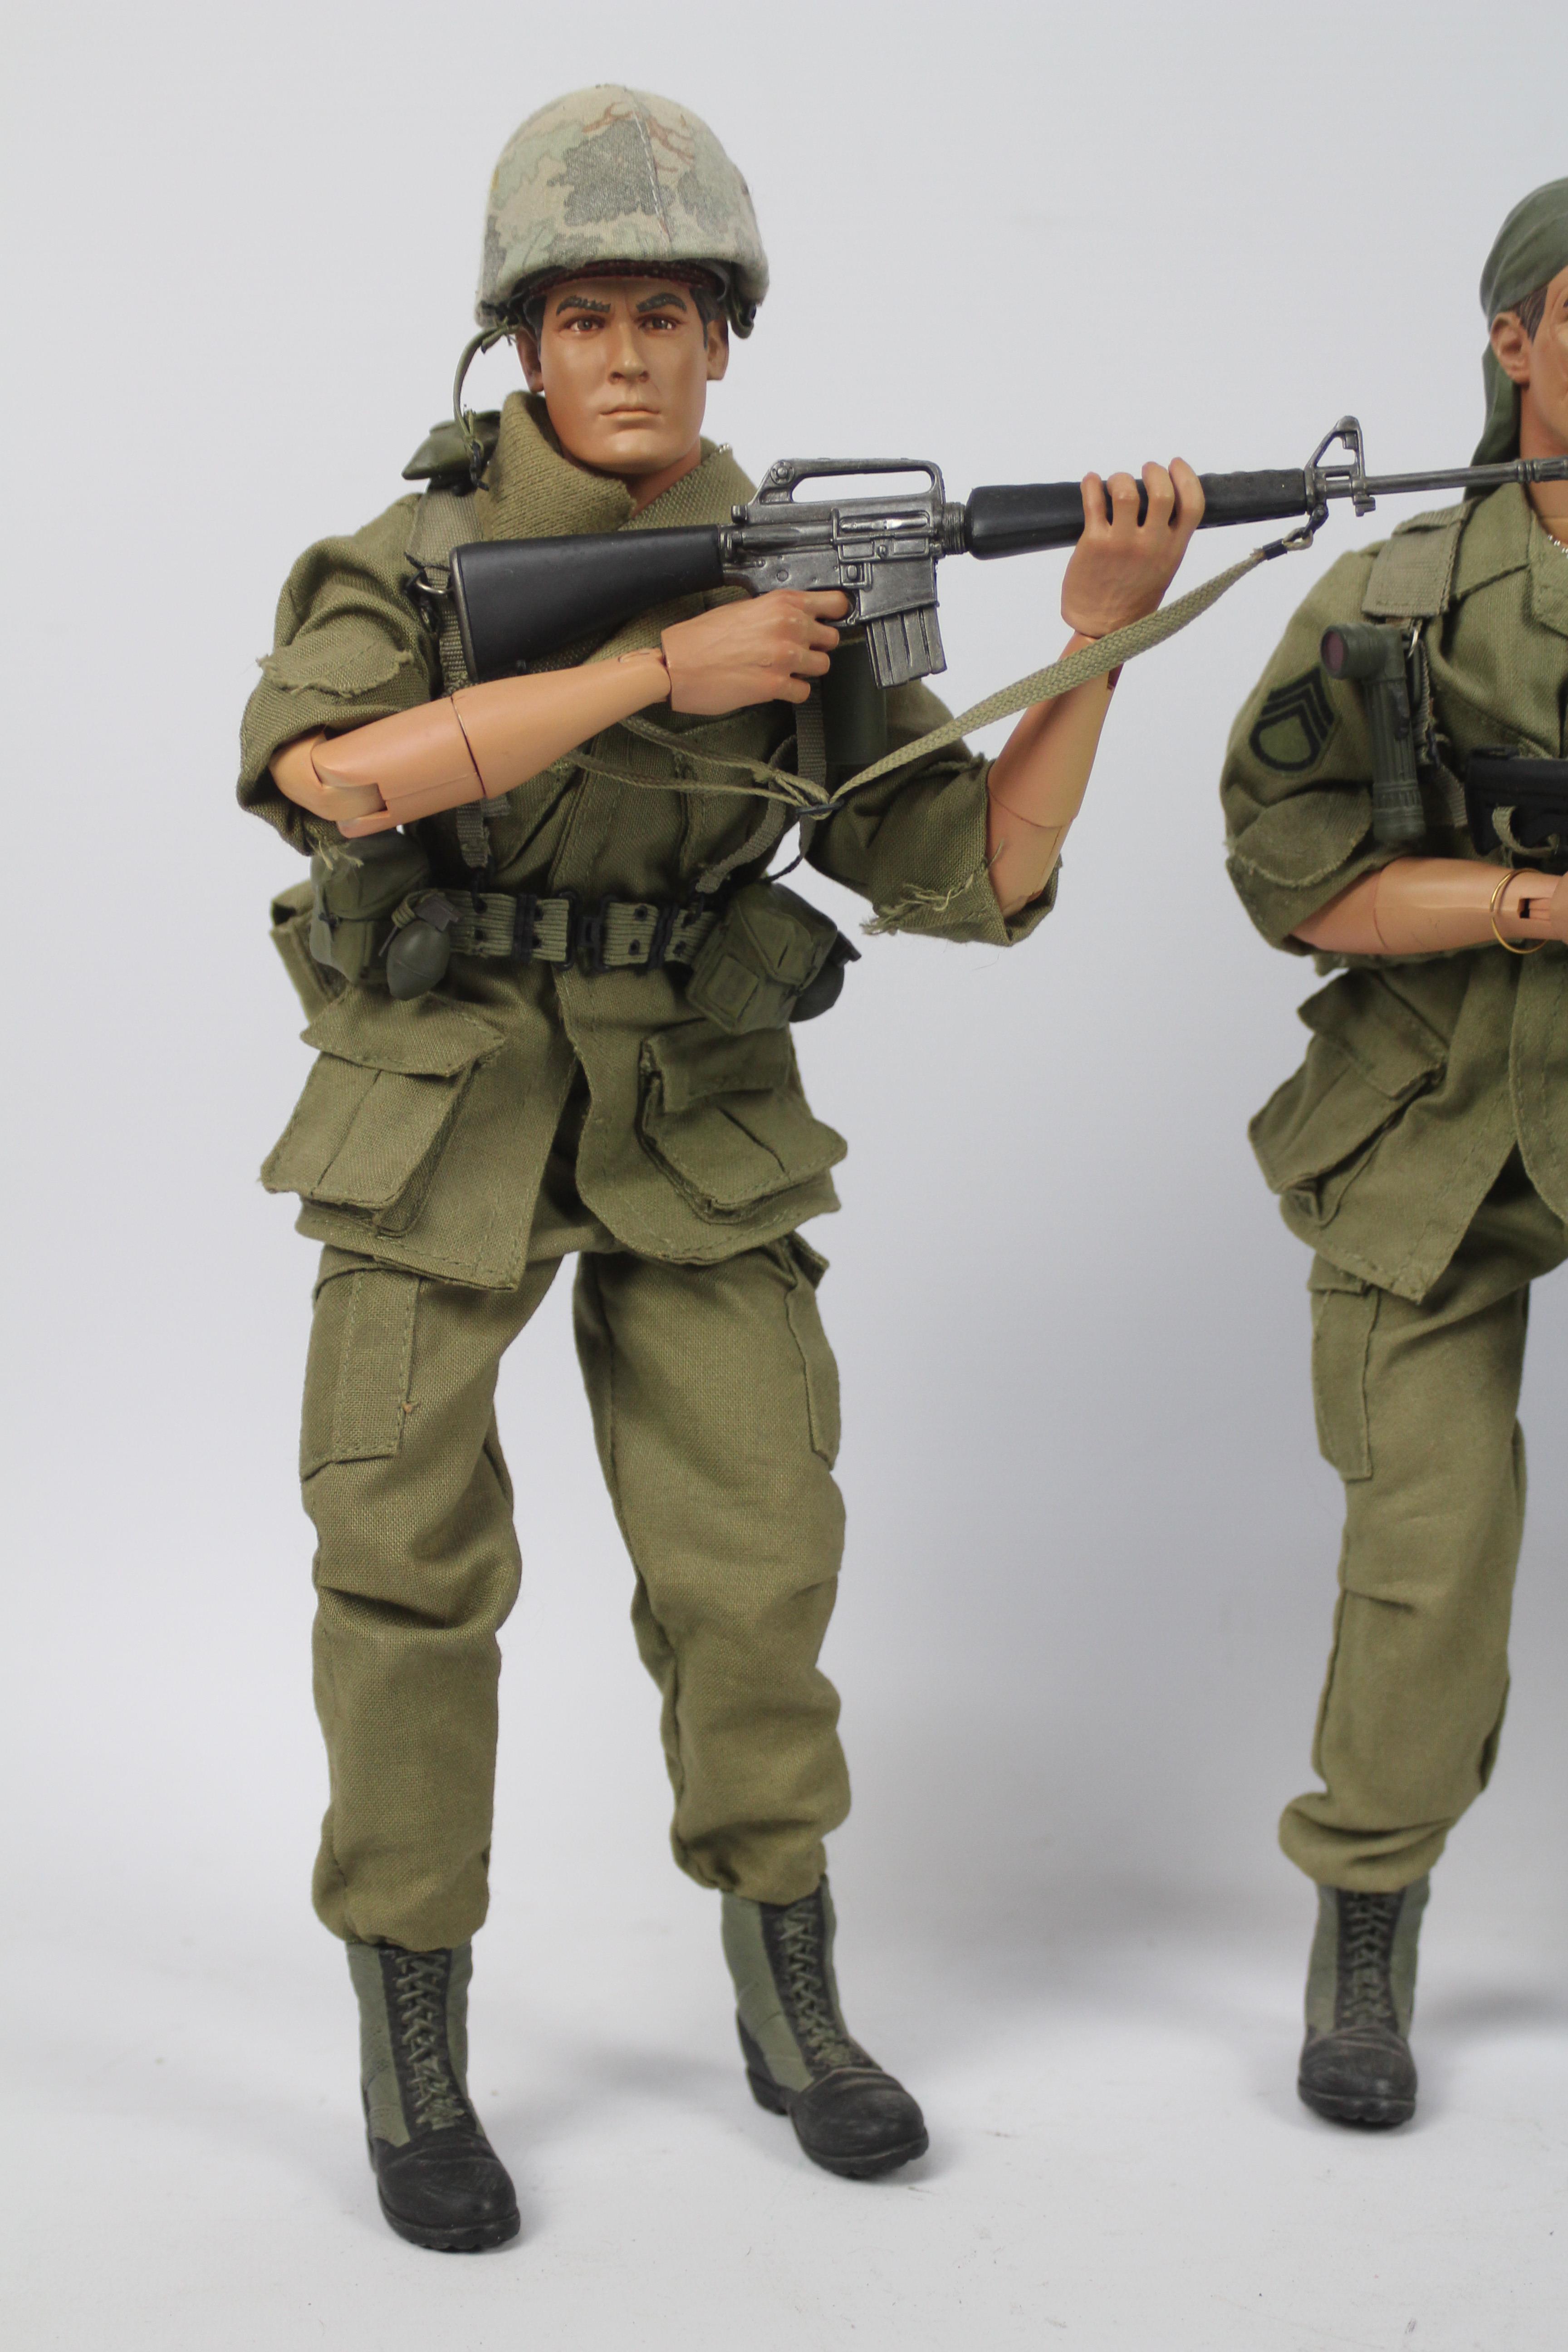 Sideshow Collectibles - Three unboxed 1:6 scale action figures from Sideshows 'Platoon' series, - Image 2 of 8